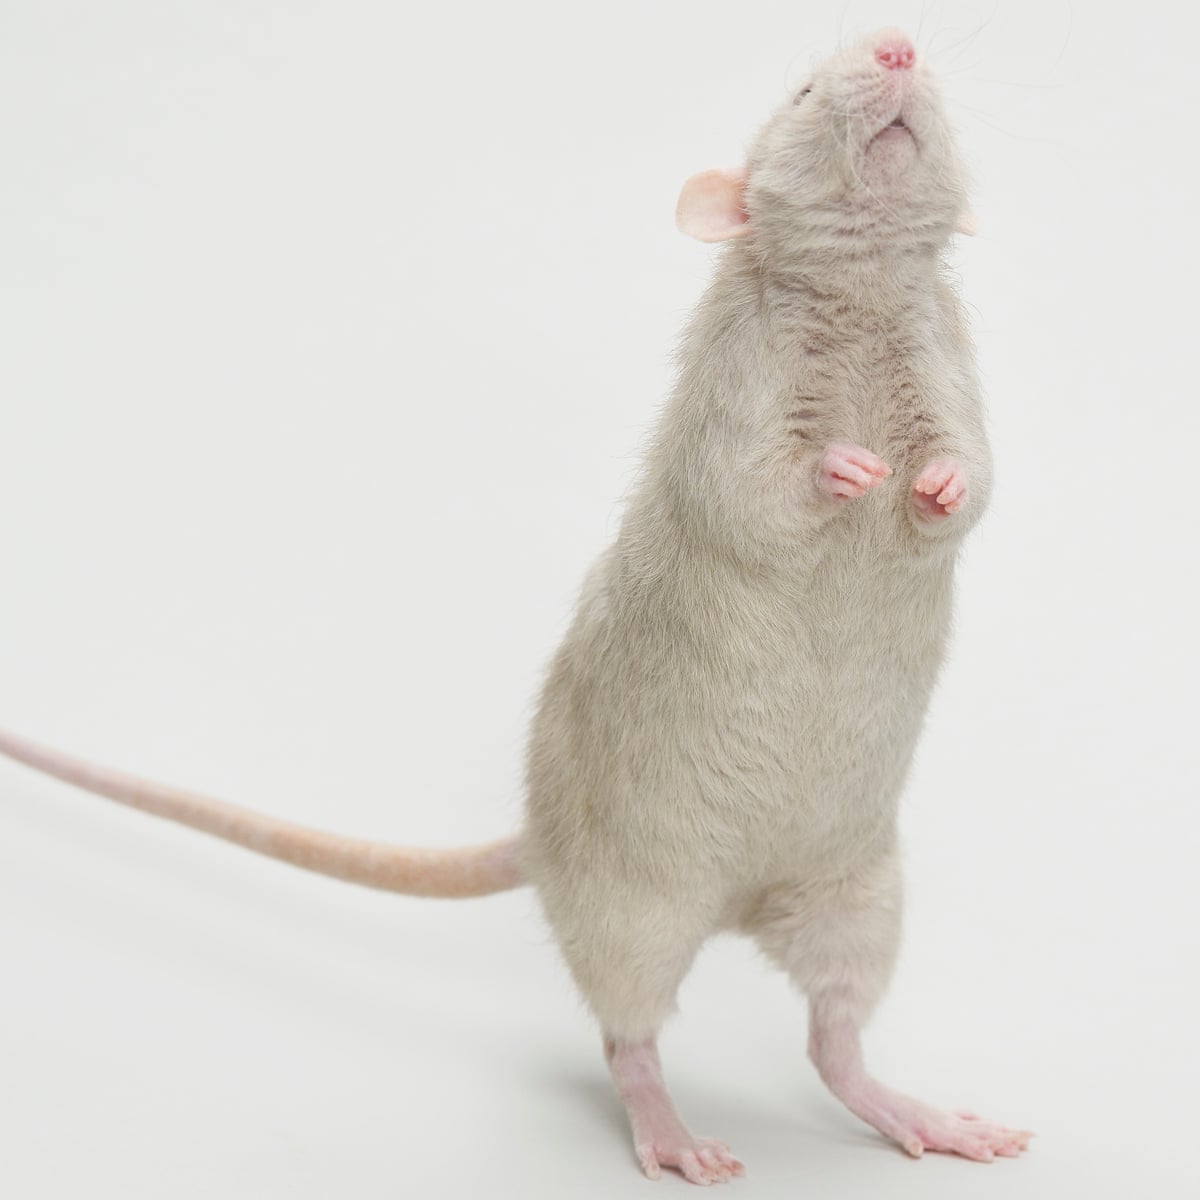 Slaves to the rhythm: rats can't resist a good beat, researchers say |  Science | The Guardian